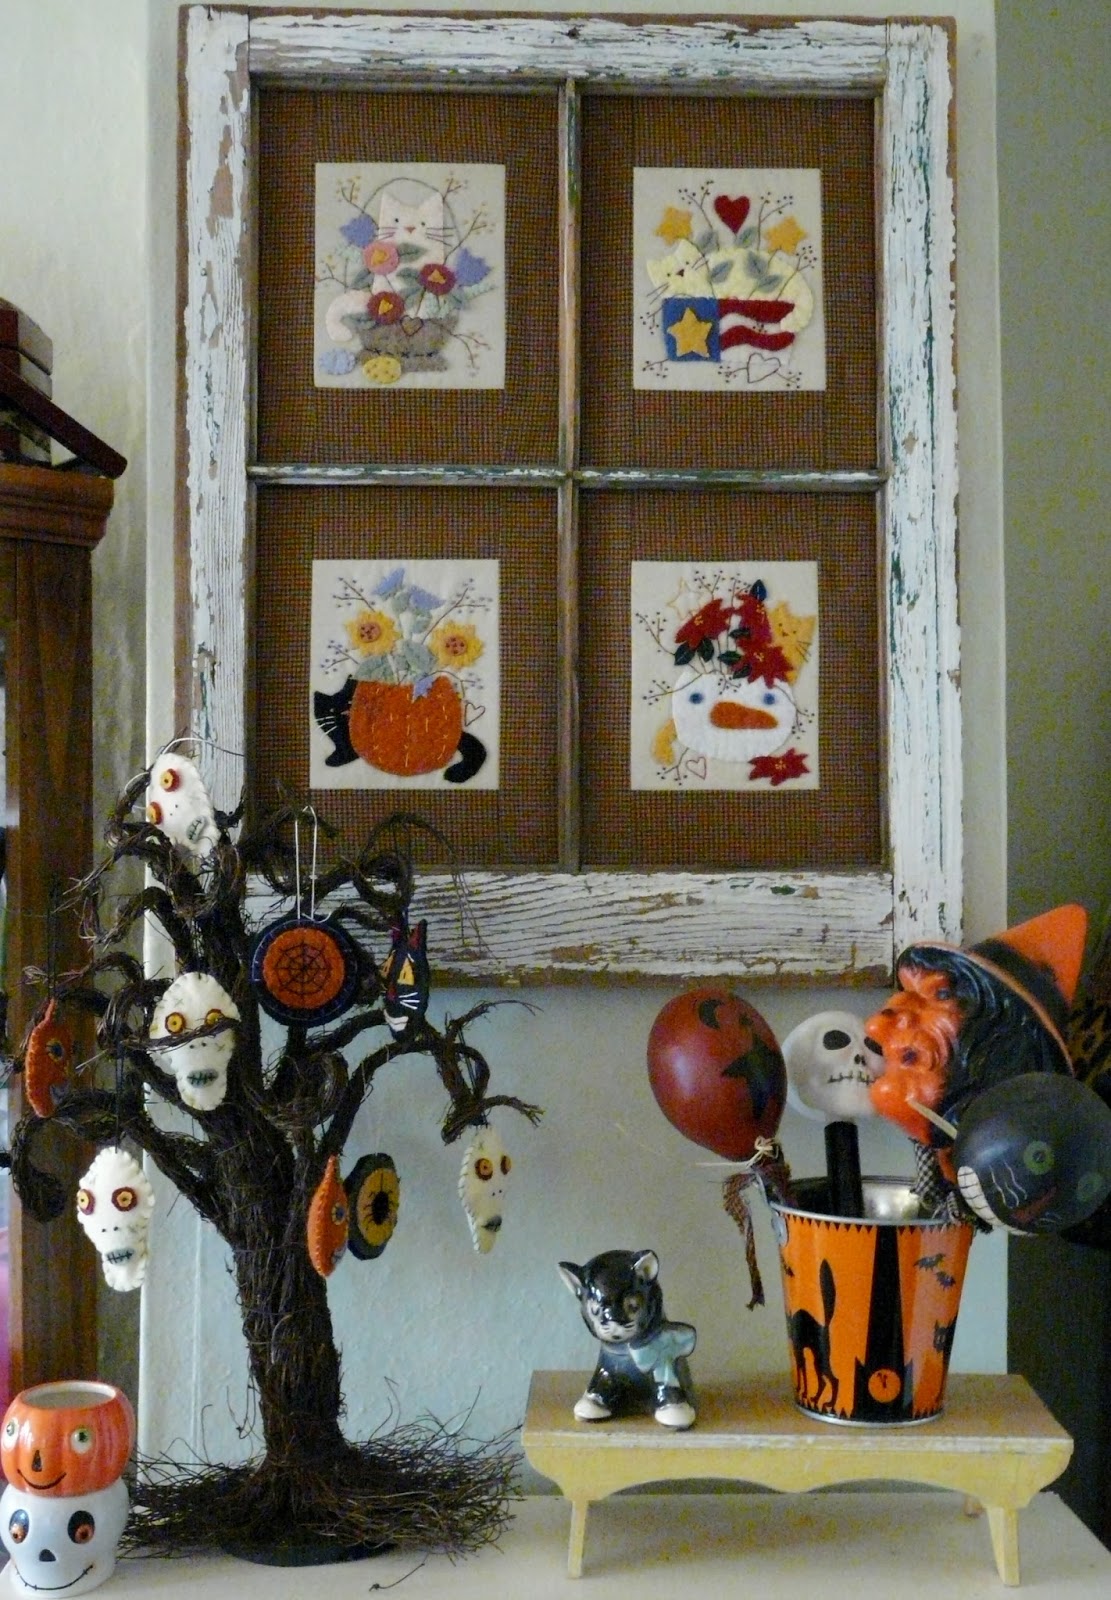 Hudson's Holidays - Designer Shirley Hudson: Welcome to my Spooky home!